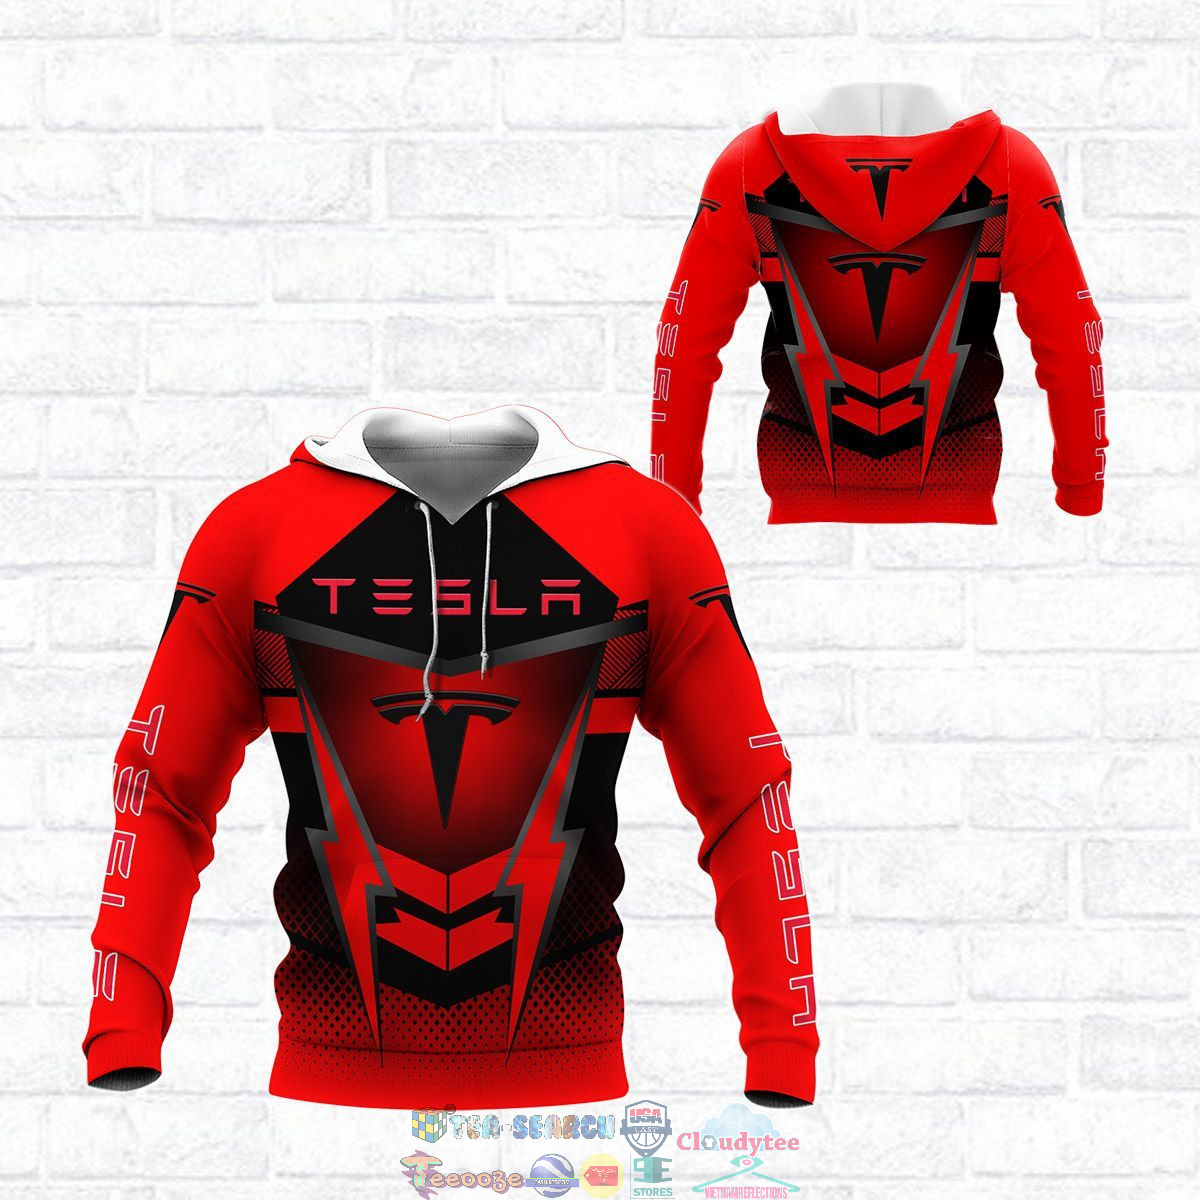 6oMK2Tz6-TH170822-16xxxTesla-Red-ver-2-3D-hoodie-and-t-shirt3.jpg